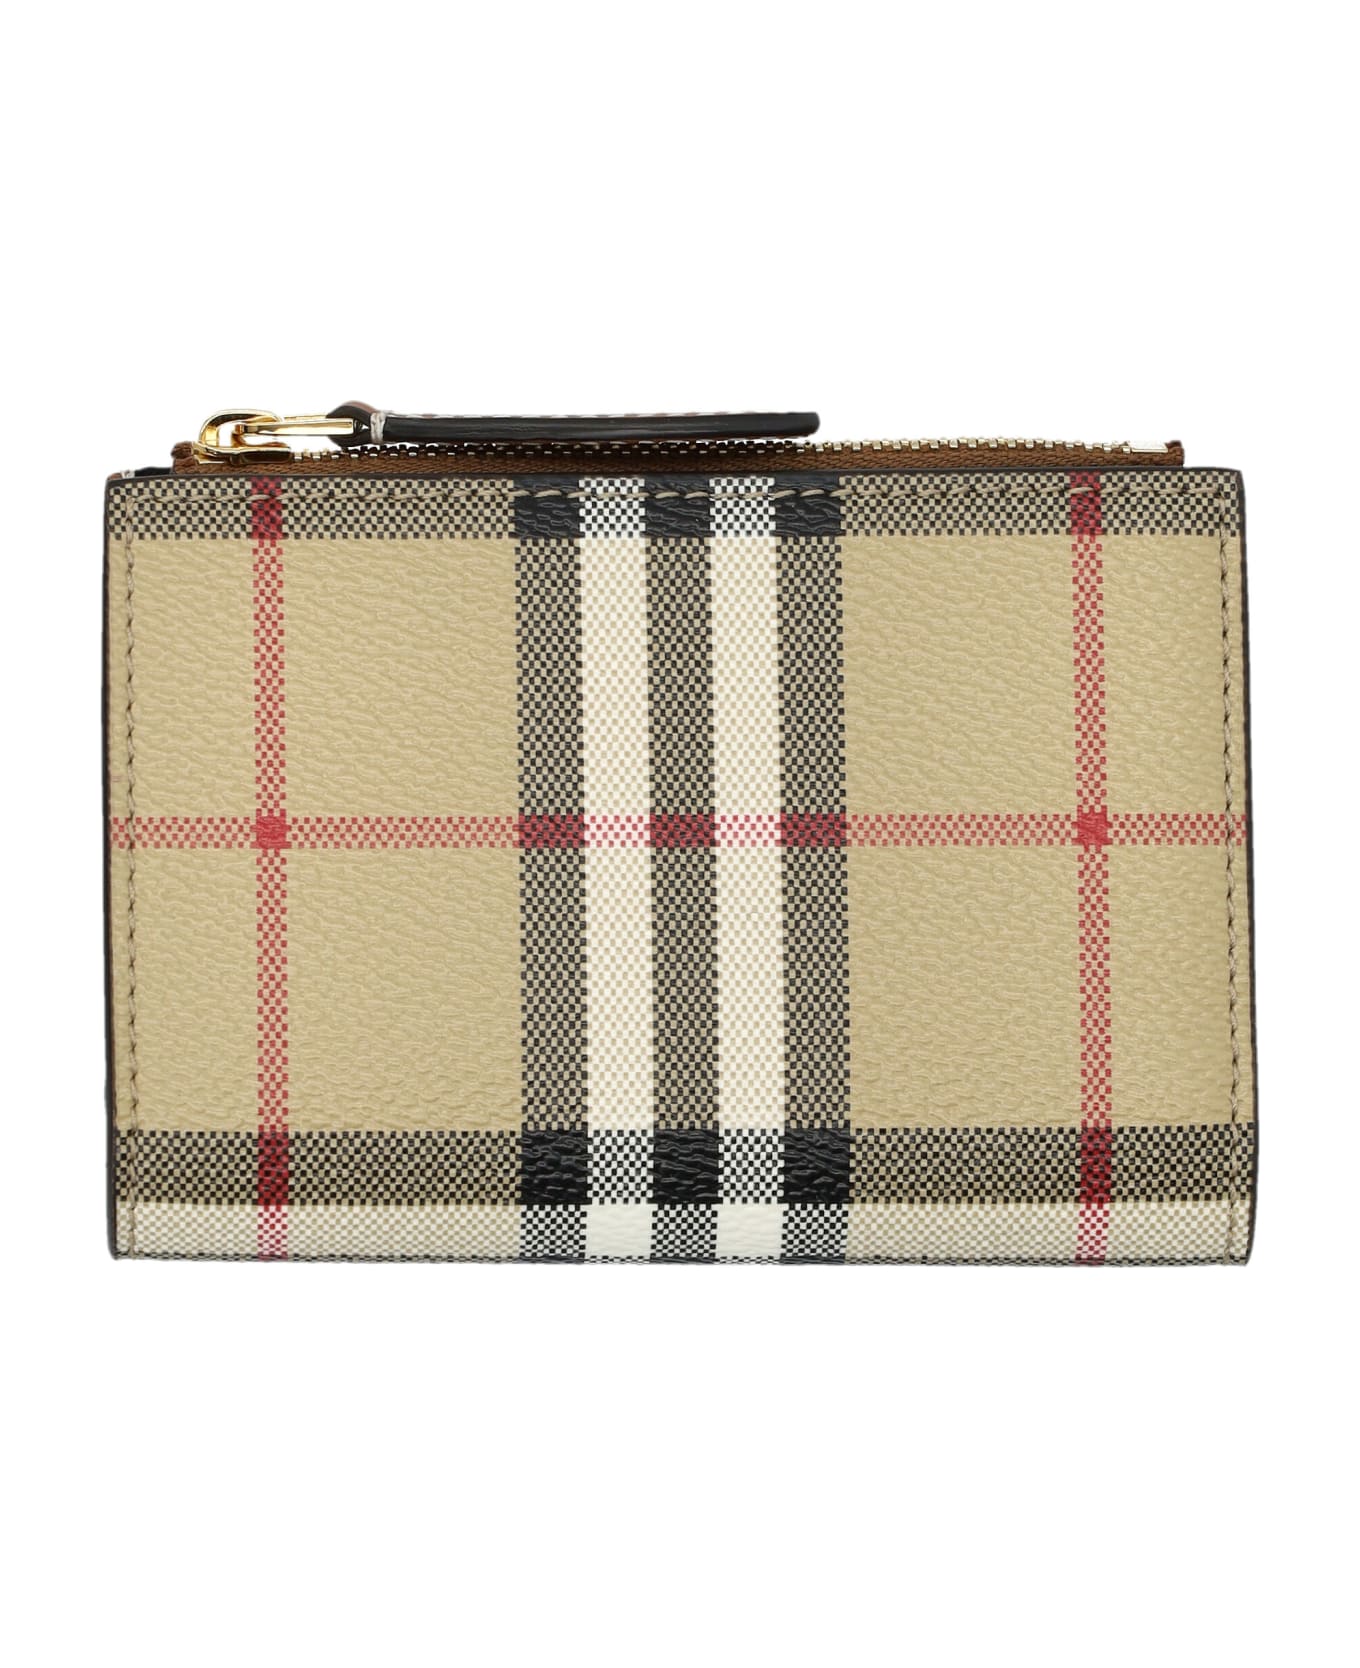 Burberry London Small Bifold Wallet - ARCHIVE BEIGE CHECK 財布